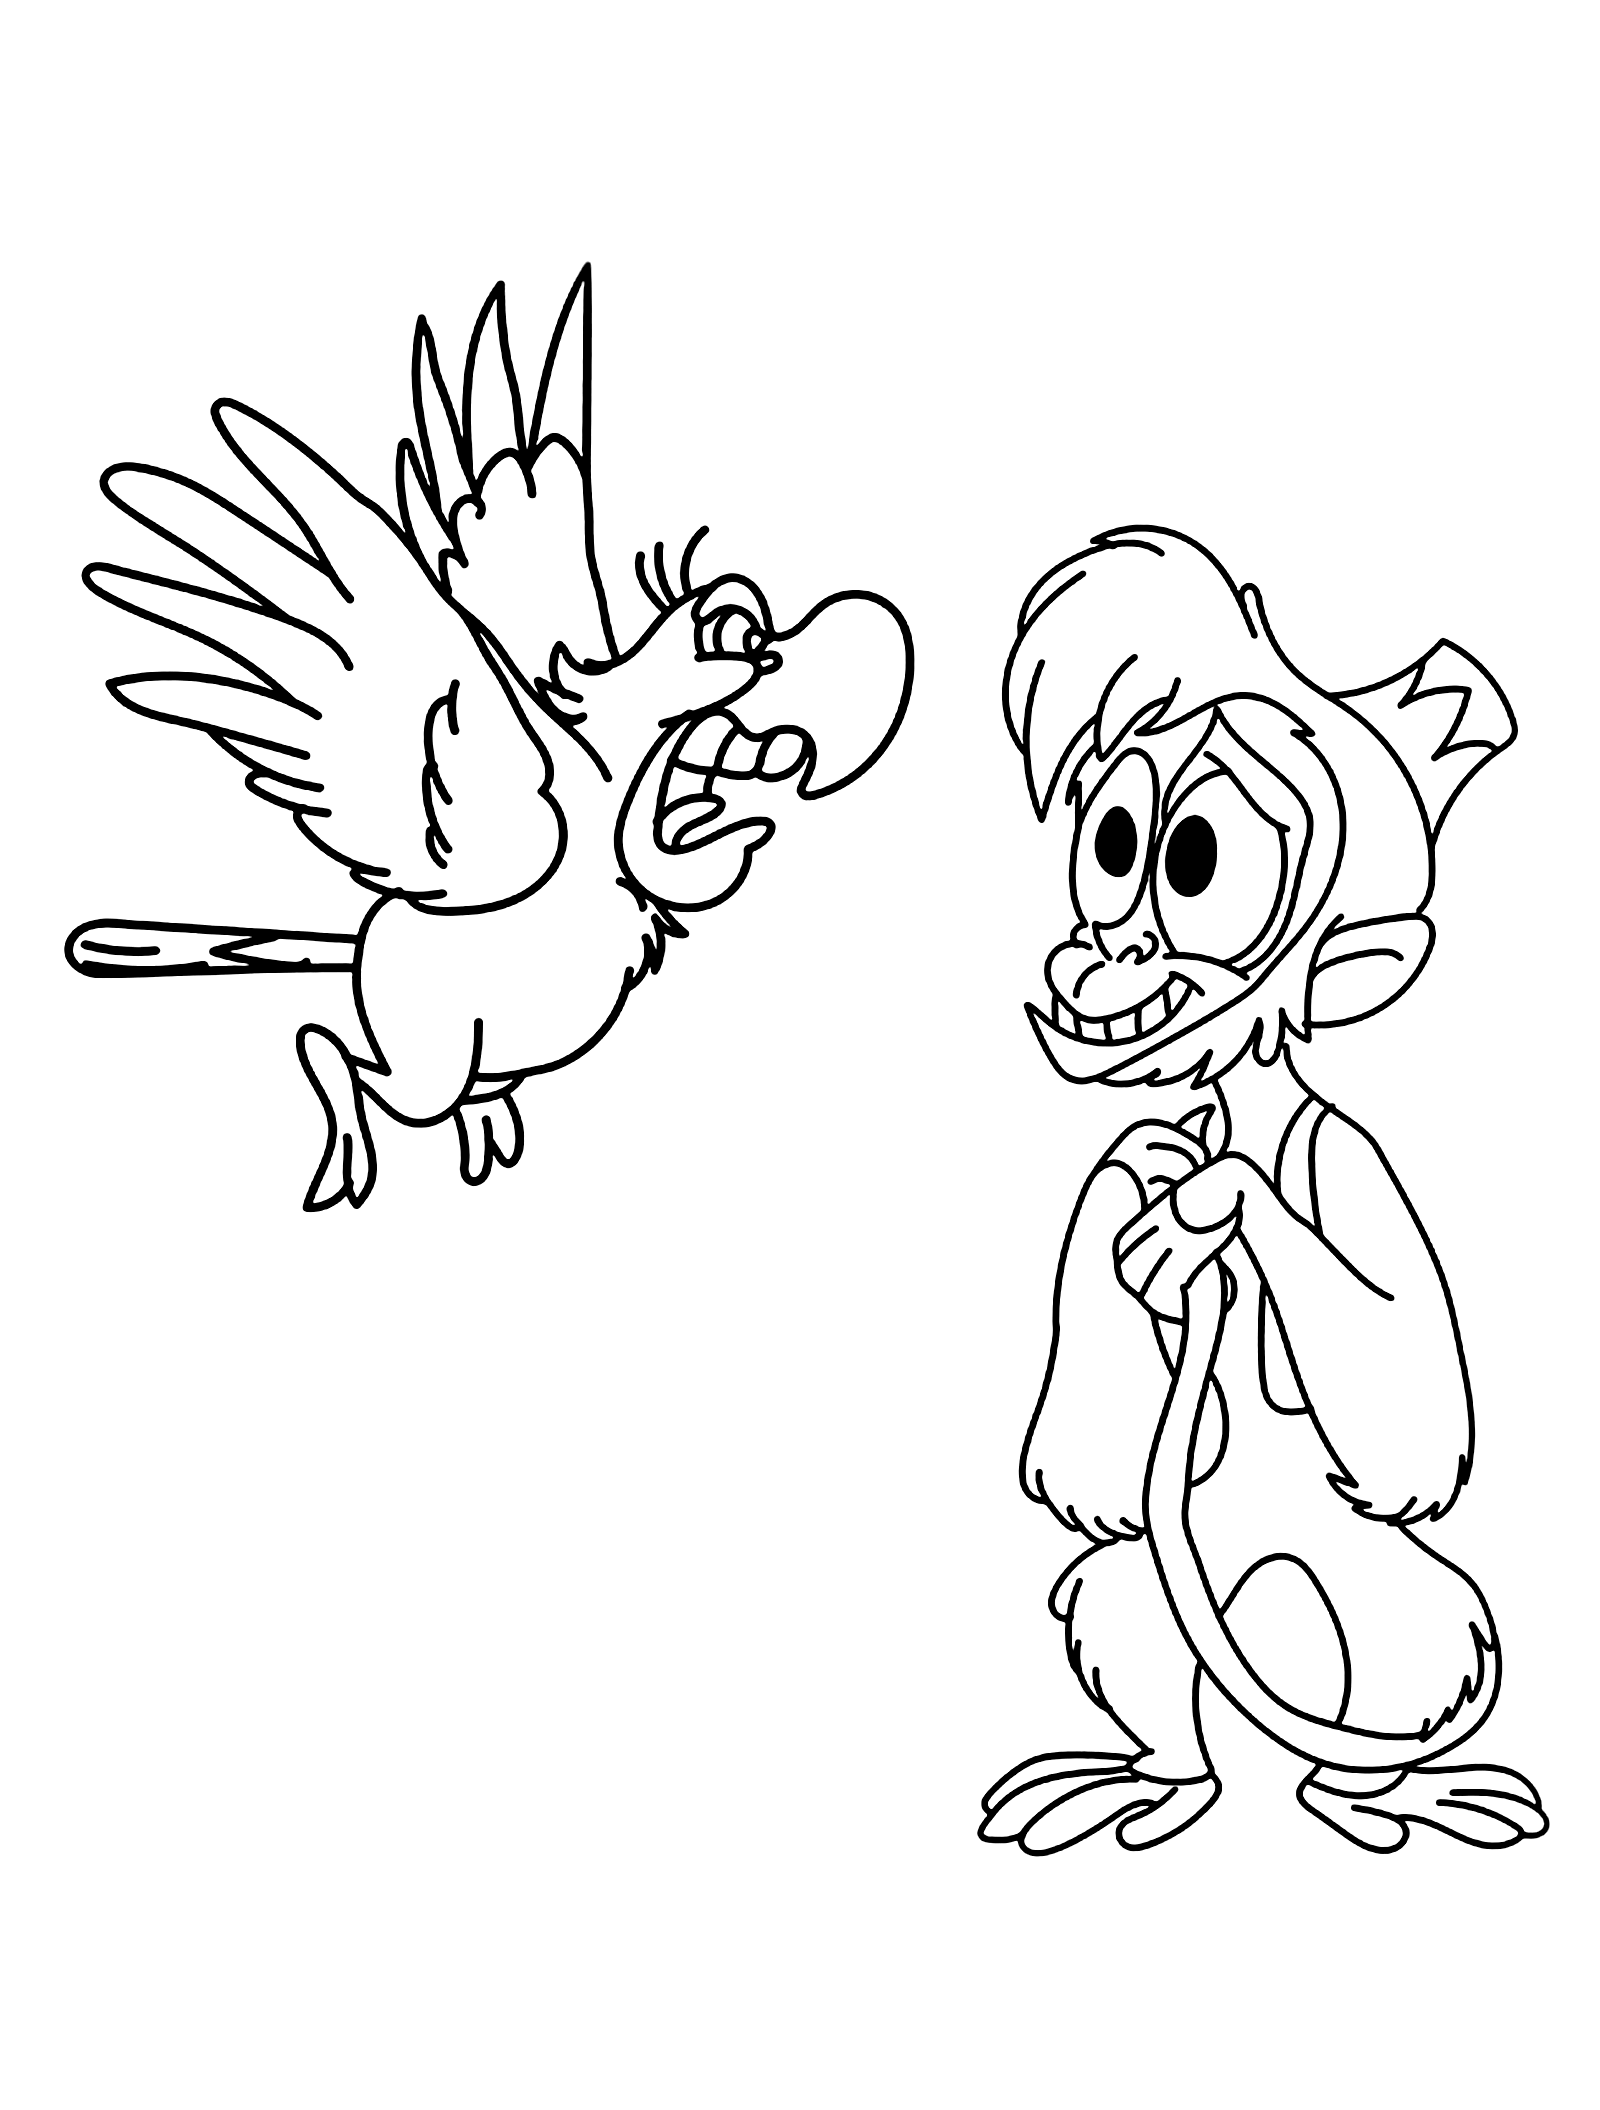 Lago Parrot and Abu Monkey Coloring Page